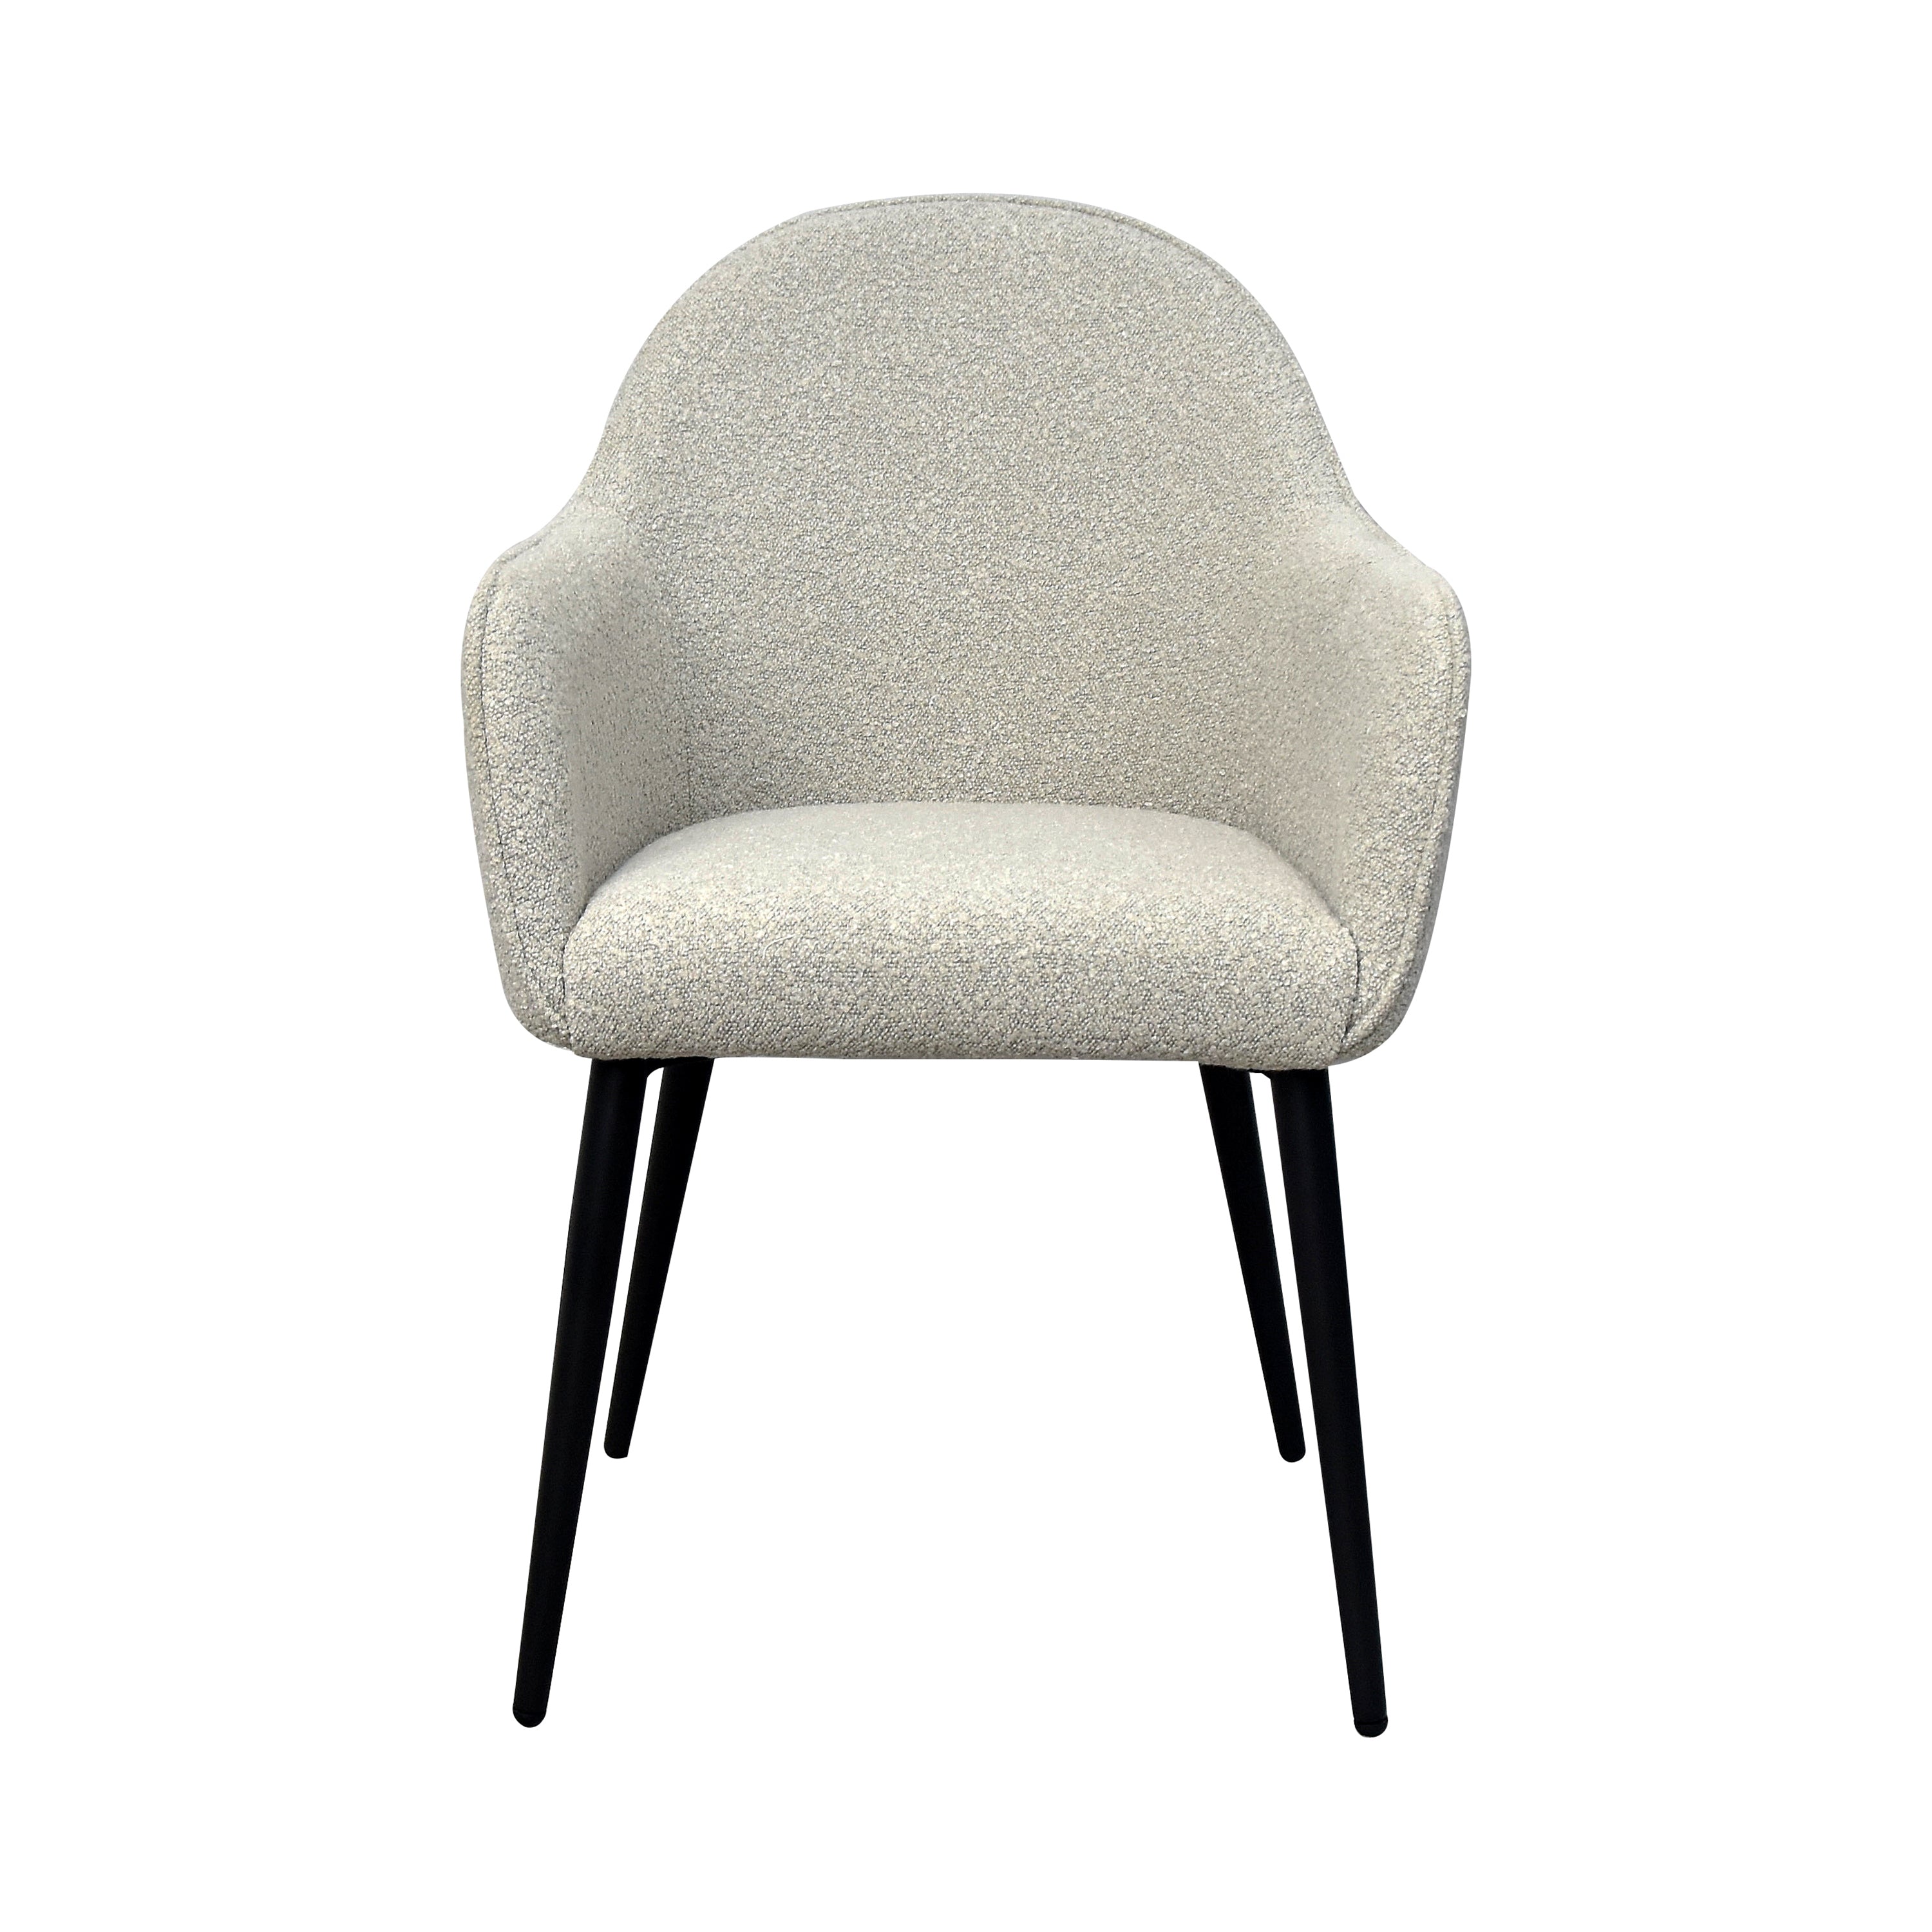 Set of 4 Cream Boucle Dining Chairs